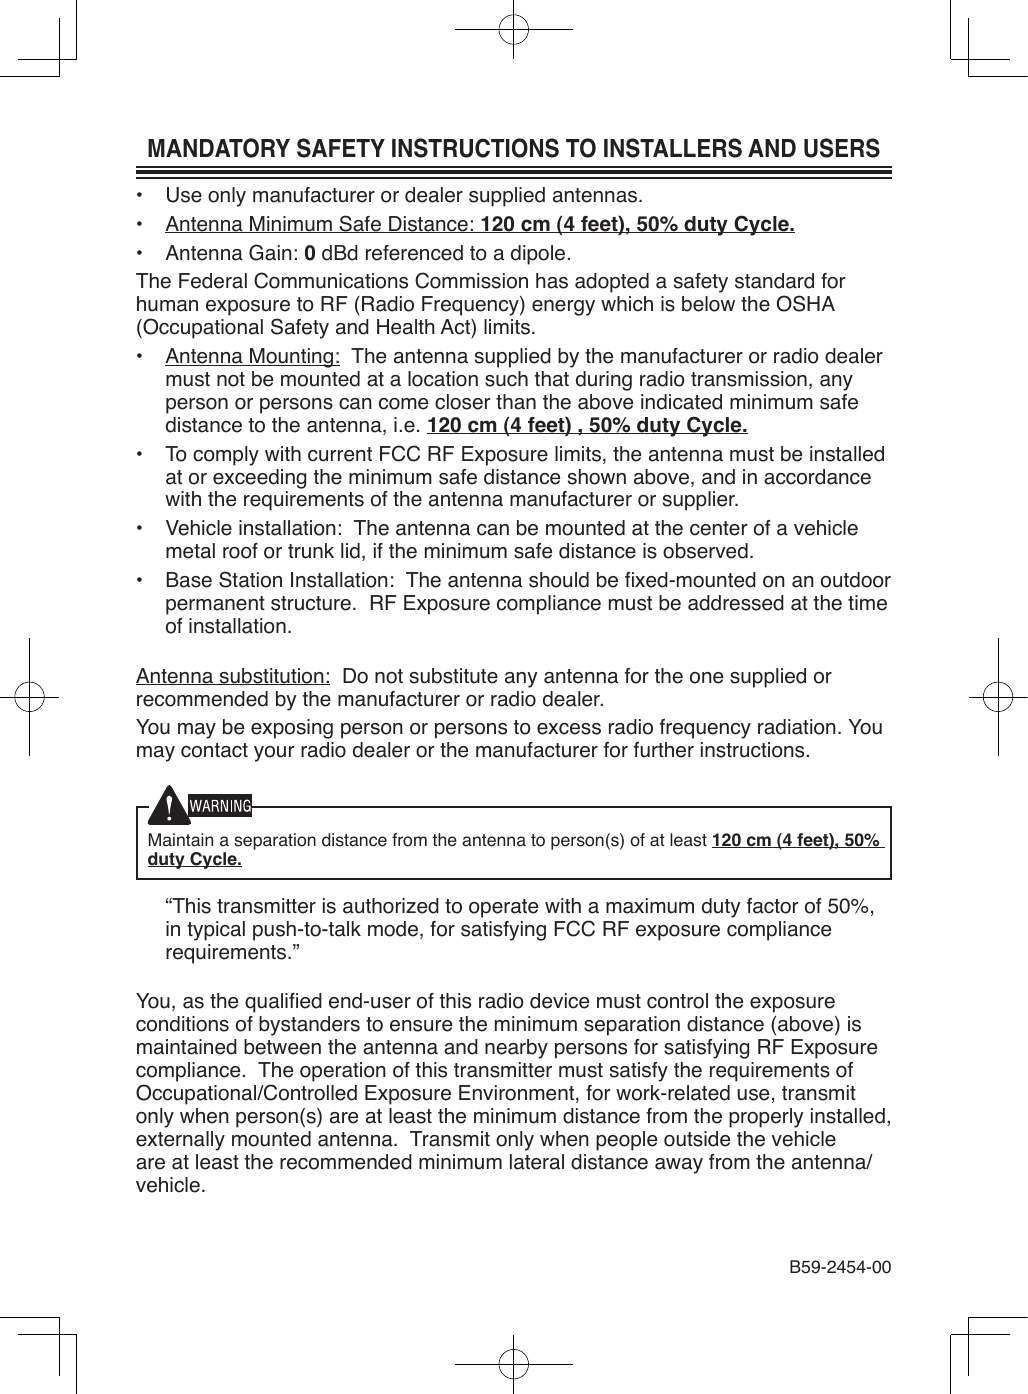 MANDATORY SAFETY INSTRUCTIONS TO INSTALLERS AND USERS•  Use only manufacturer or dealer supplied antennas.•  Antenna Minimum Safe Distance: 120 cm (4 feet), 50% duty Cycle.•  Antenna Gain: 0 dBd referenced to a dipole.The Federal Communications Commission has adopted a safety standard for human exposure to RF (Radio Frequency) energy which is below the OSHA (Occupational Safety and Health Act) limits.•  Antenna Mounting:  The antenna supplied by the manufacturer or radio dealer must not be mounted at a location such that during radio transmission, any person or persons can come closer than the above indicated minimum safe distance to the antenna, i.e. 120 cm (4 feet) , 50% duty Cycle.•  To comply with current FCC RF Exposure limits, the antenna must be installed at or exceeding the minimum safe distance shown above, and in accordance with the requirements of the antenna manufacturer or supplier.•  Vehicle installation:  The antenna can be mounted at the center of a vehicle metal roof or trunk lid, if the minimum safe distance is observed.•  Base Station Installation:  The antenna should be xed-mounted on an outdoor permanent structure.  RF Exposure compliance must be addressed at the time of installation.Antenna substitution:  Do not substitute any antenna for the one supplied or recommended by the manufacturer or radio dealer.You may be exposing person or persons to excess radio frequency radiation. You may contact your radio dealer or the manufacturer for further instructions.Maintain a separation distance from the antenna to person(s) of at least 120 cm (4 feet), 50% duty Cycle.  “This transmitter is authorized to operate with a maximum duty factor of 50%, in typical push-to-talk mode, for satisfying FCC RF exposure compliance requirements.”You, as the qualied end-user of this radio device must control the exposure conditions of bystanders to ensure the minimum separation distance (above) is maintained between the antenna and nearby persons for satisfying RF Exposure compliance.  The operation of this transmitter must satisfy the requirements of Occupational/Controlled Exposure Environment, for work-related use, transmit only when person(s) are at least the minimum distance from the properly installed, externally mounted antenna.  Transmit only when people outside the vehicle are at least the recommended minimum lateral distance away from the antenna/vehicle.B59-2454-00